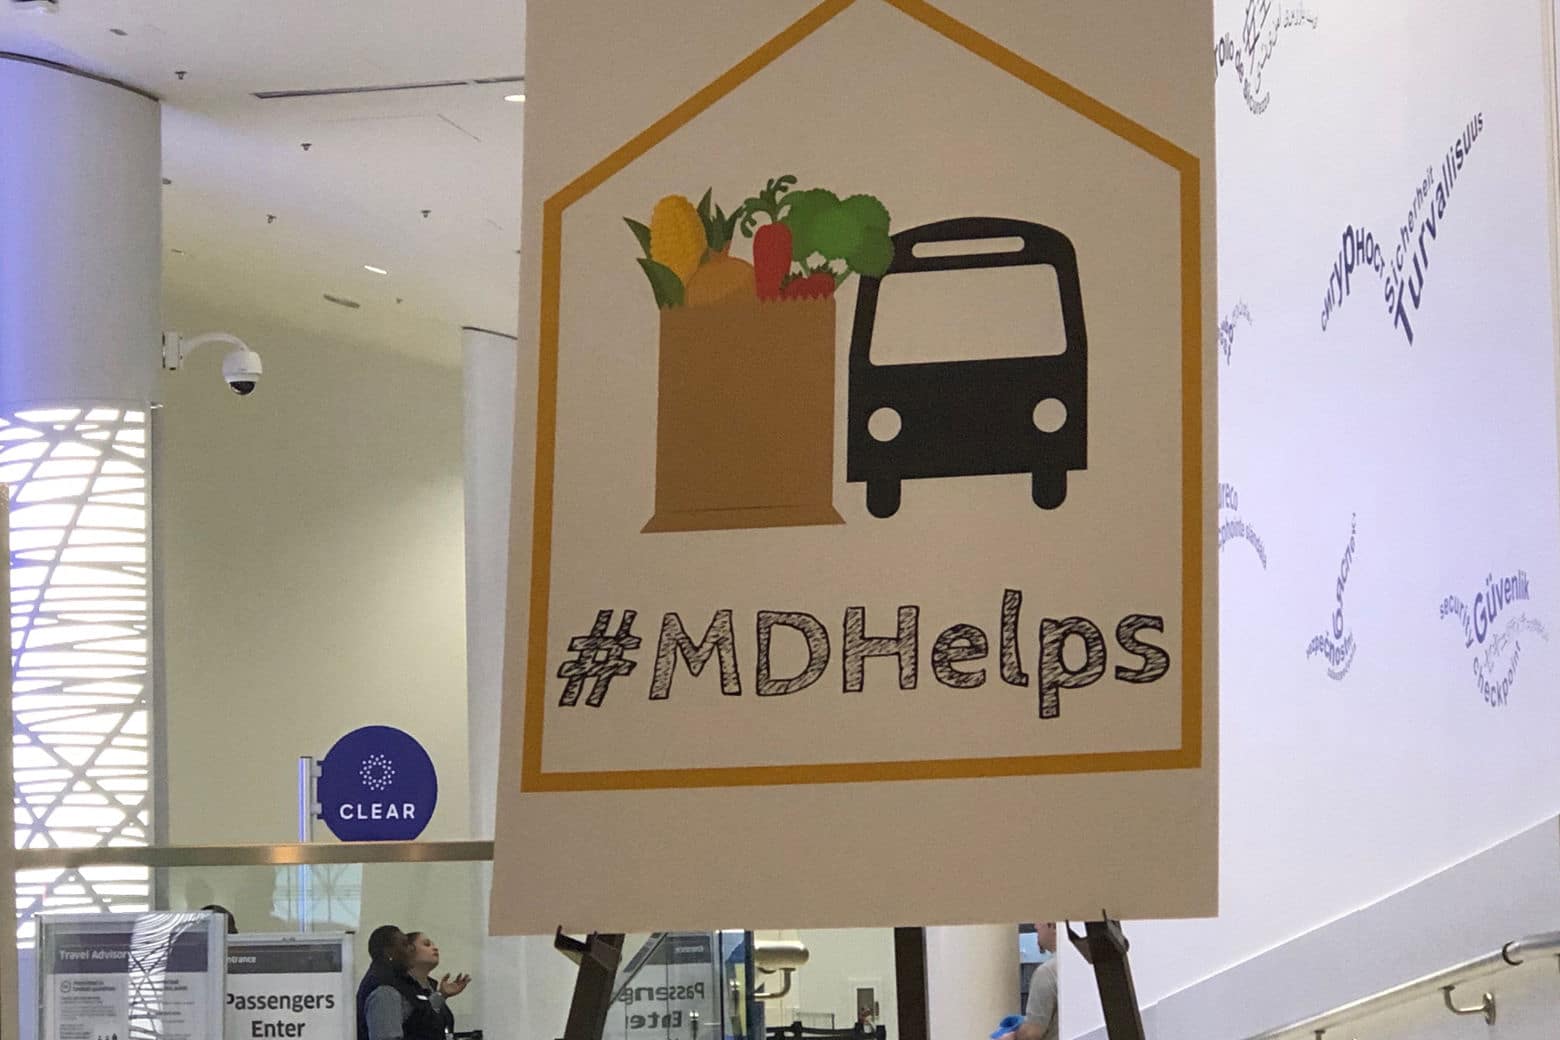 Hogan also announced a statewide food drive called #MDHELPS being administered by the state General Services Administration, with 15 sites scattered across the state. (WTOP/Kate Ryan)